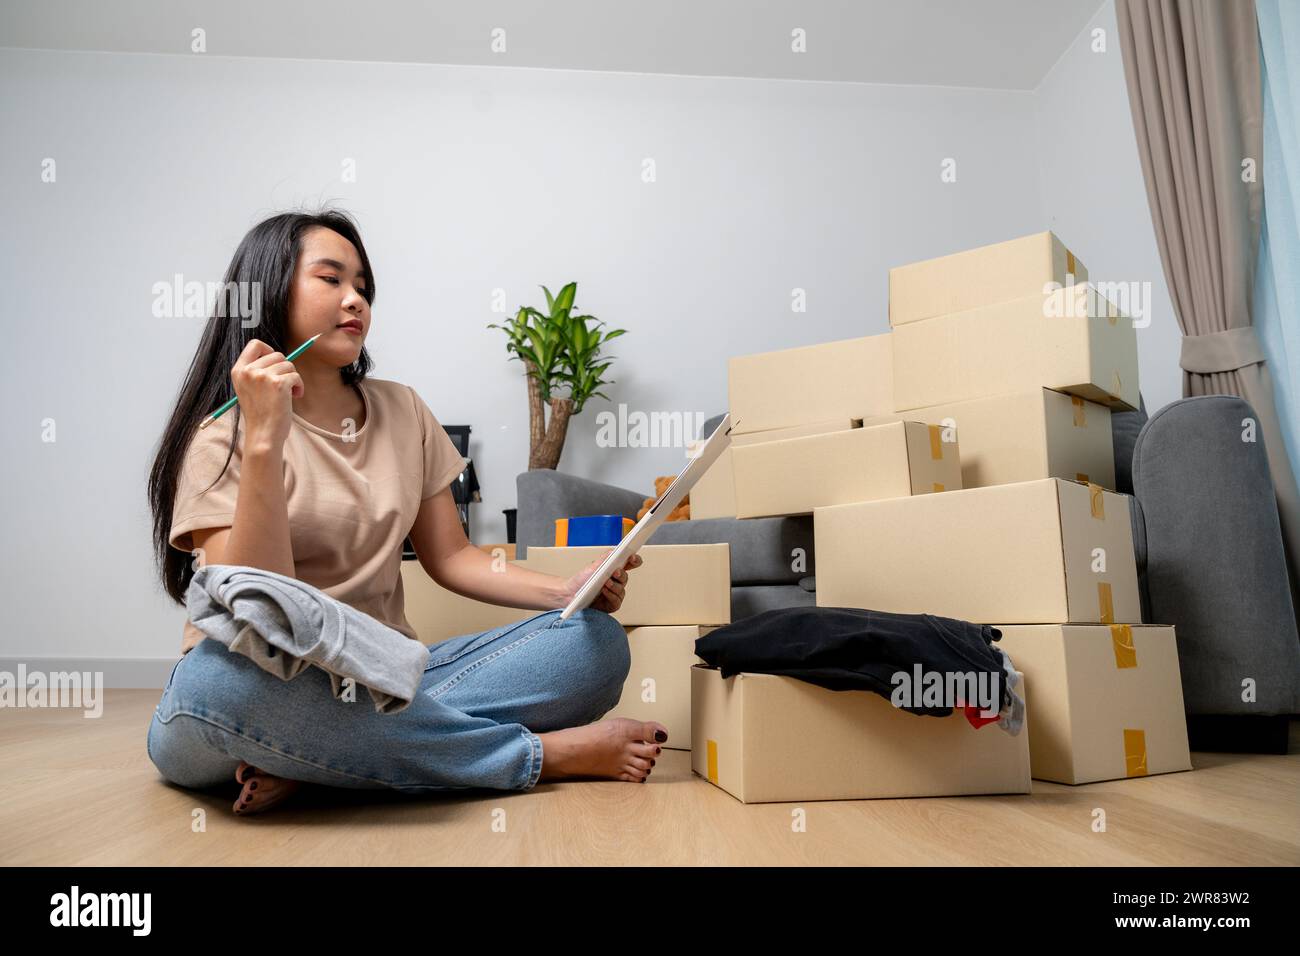 The young woman is checking a list of household items in a paper box to prepare for moving into a new hous Stock Photo